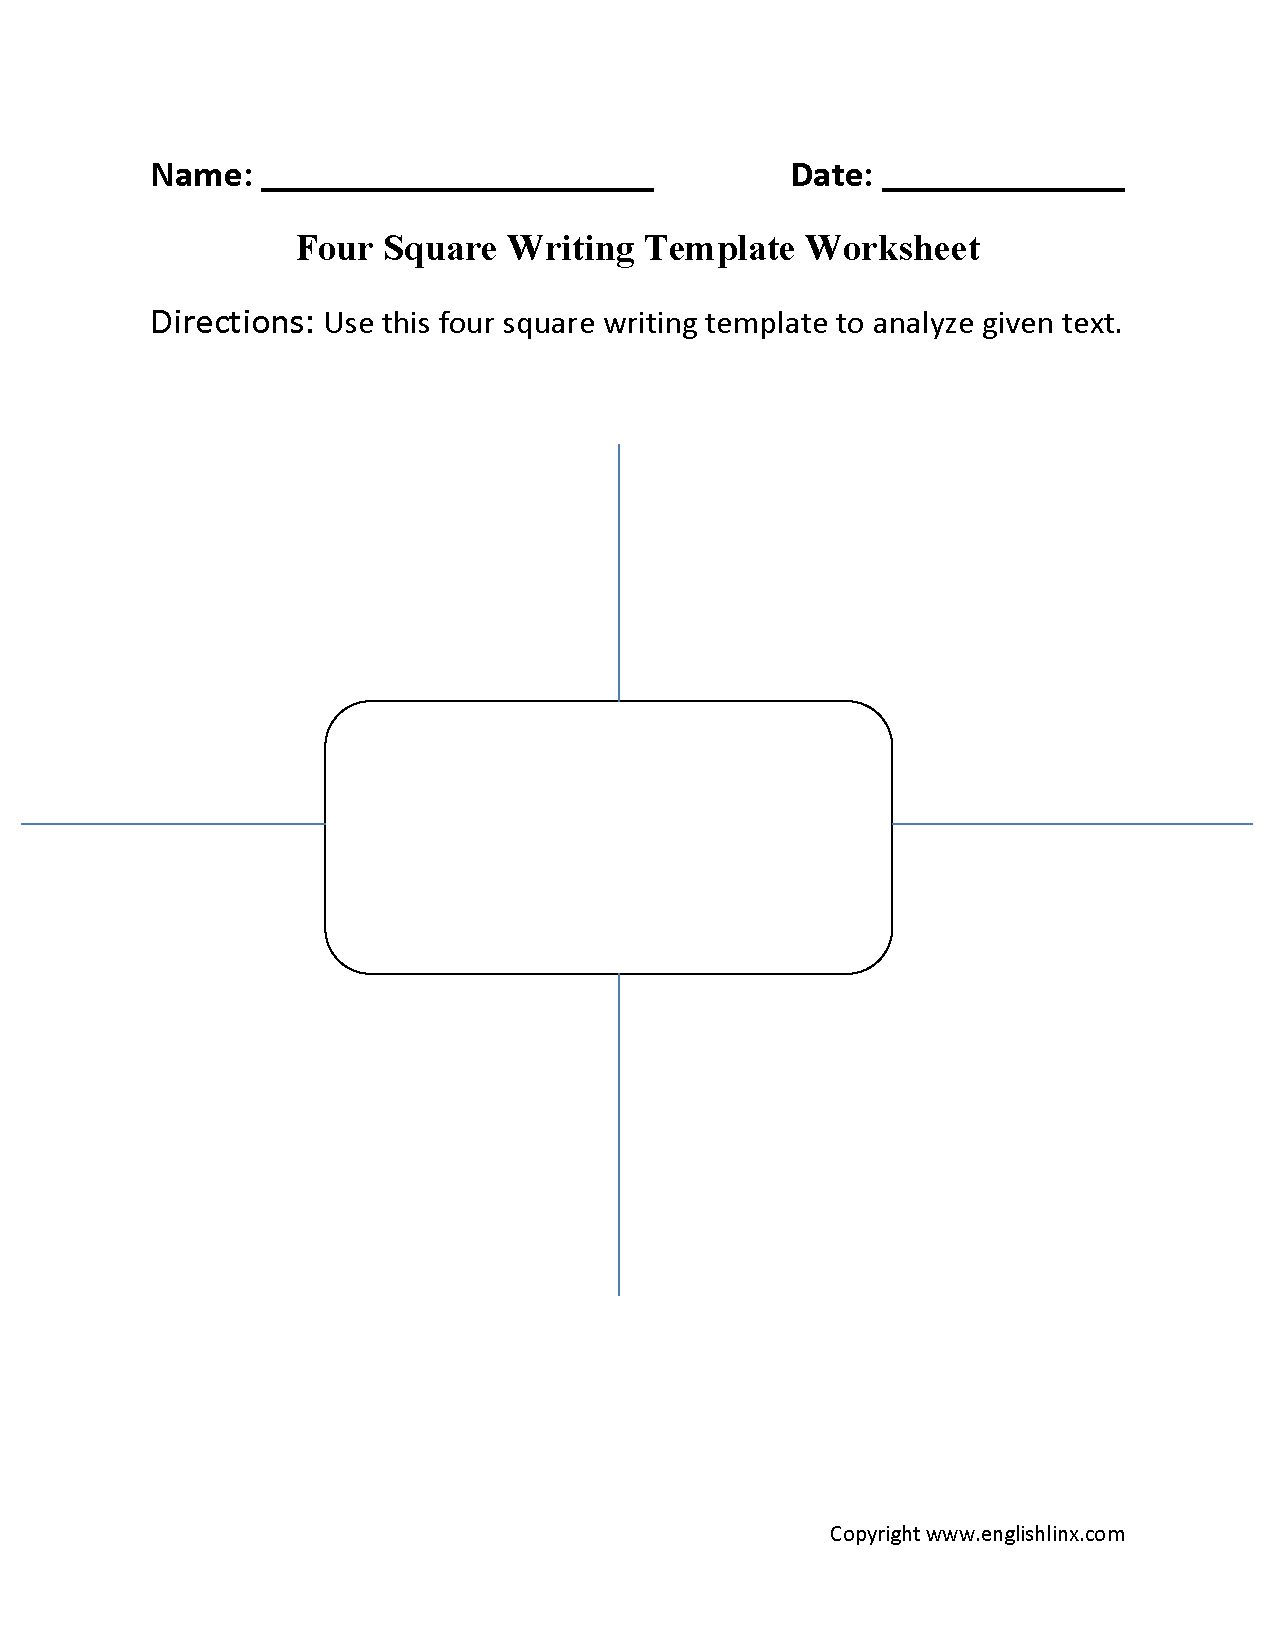 Writing Worksheets | Writing Template Worksheets Within Blank Four Square Writing Template